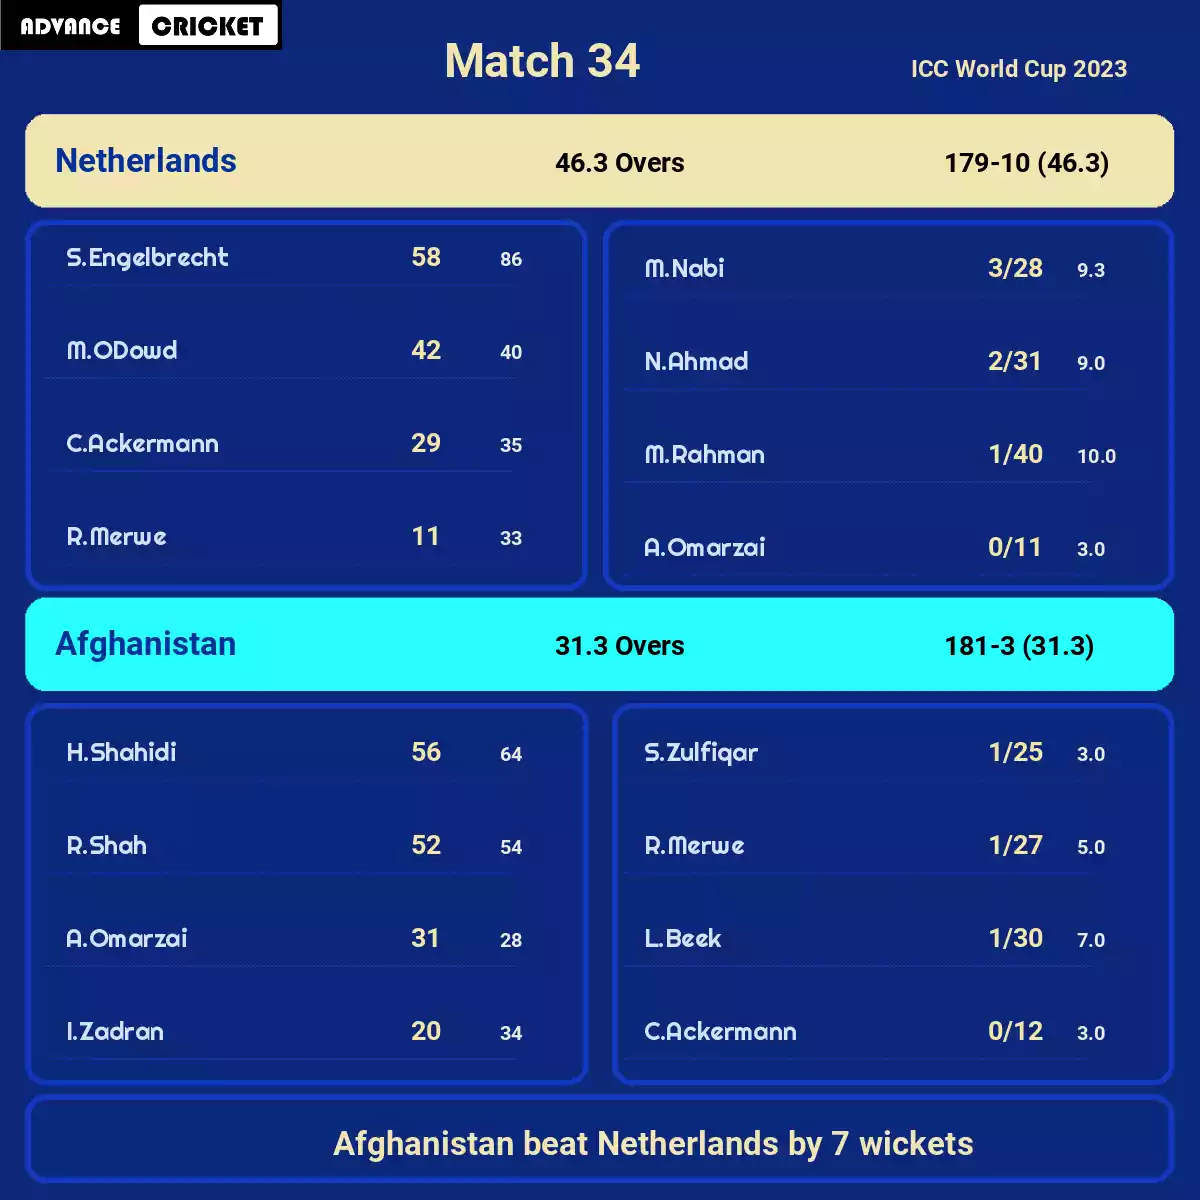 NED vs AFG Match 34 ICC World Cup 2023